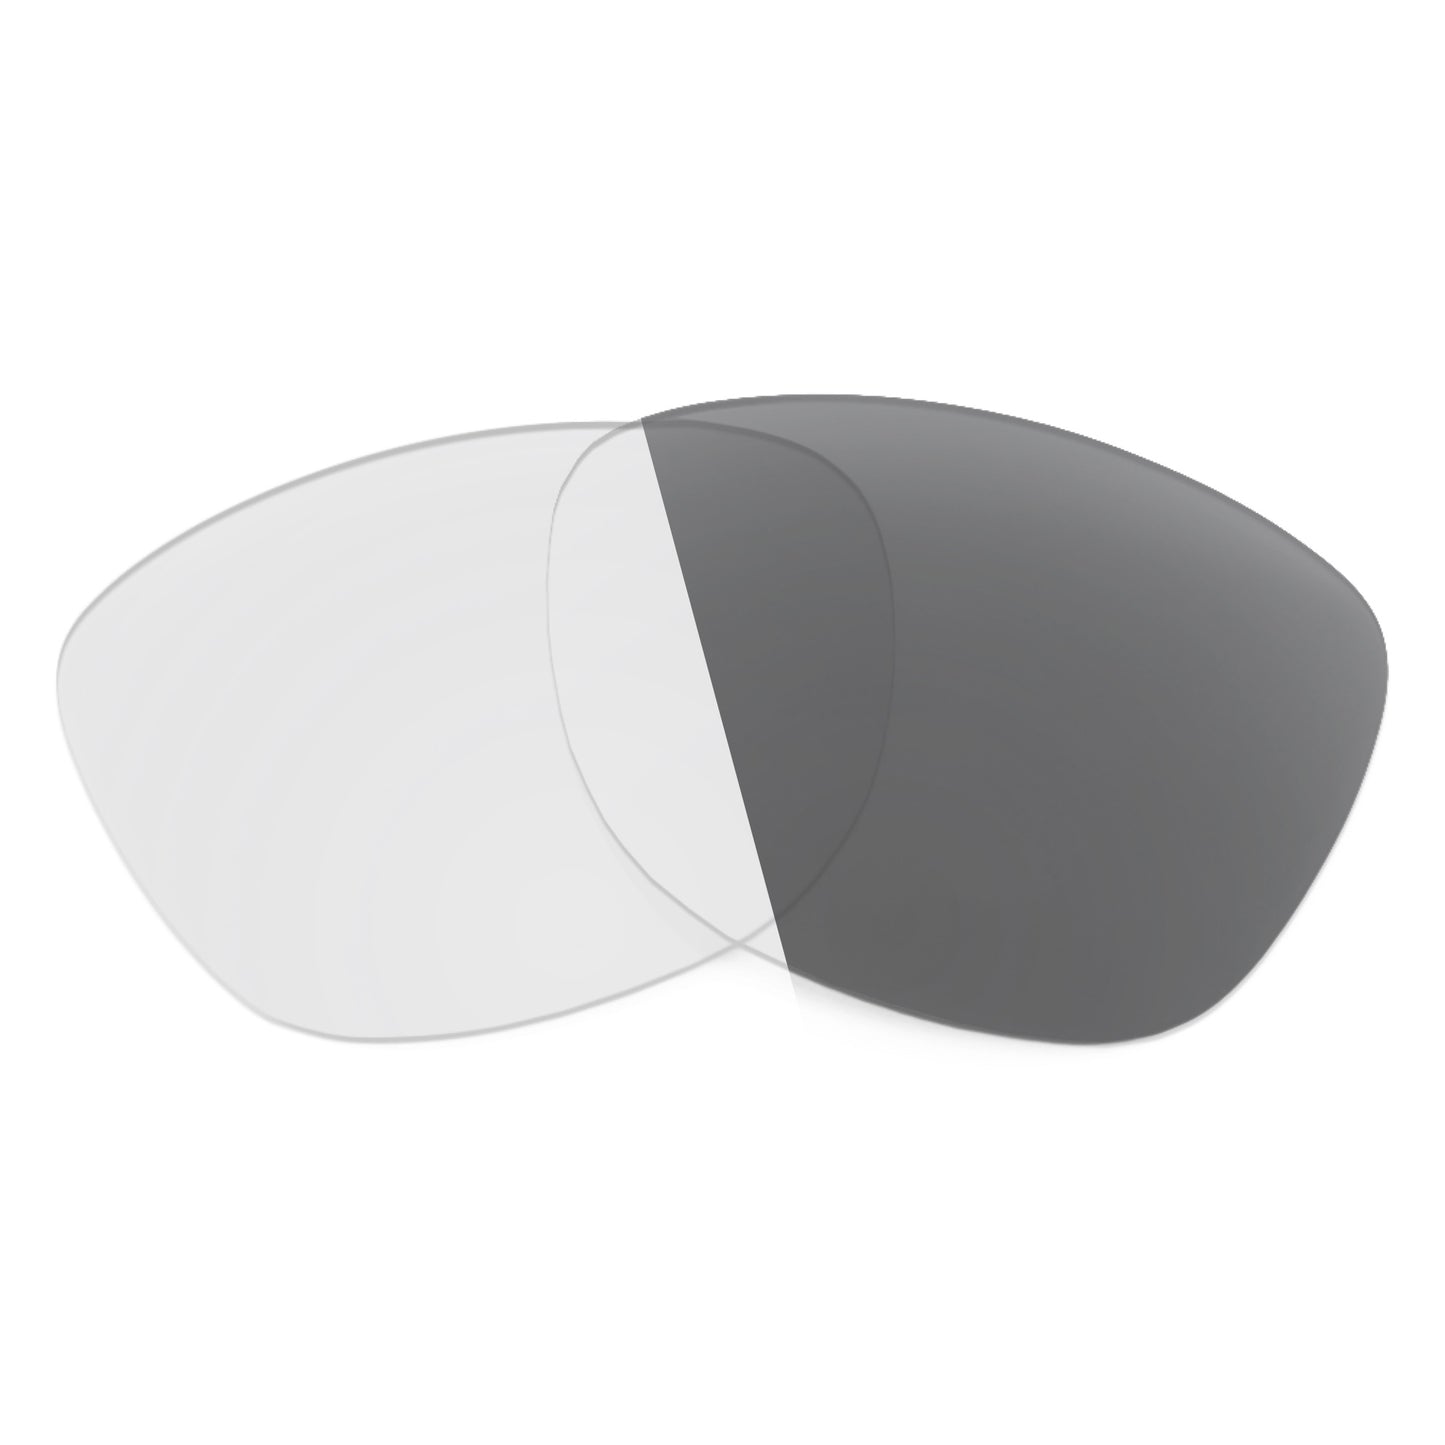 Revant replacement lenses for Ray-Ban RB4306 54mm Non-Polarized Adapt Gray Photochromic